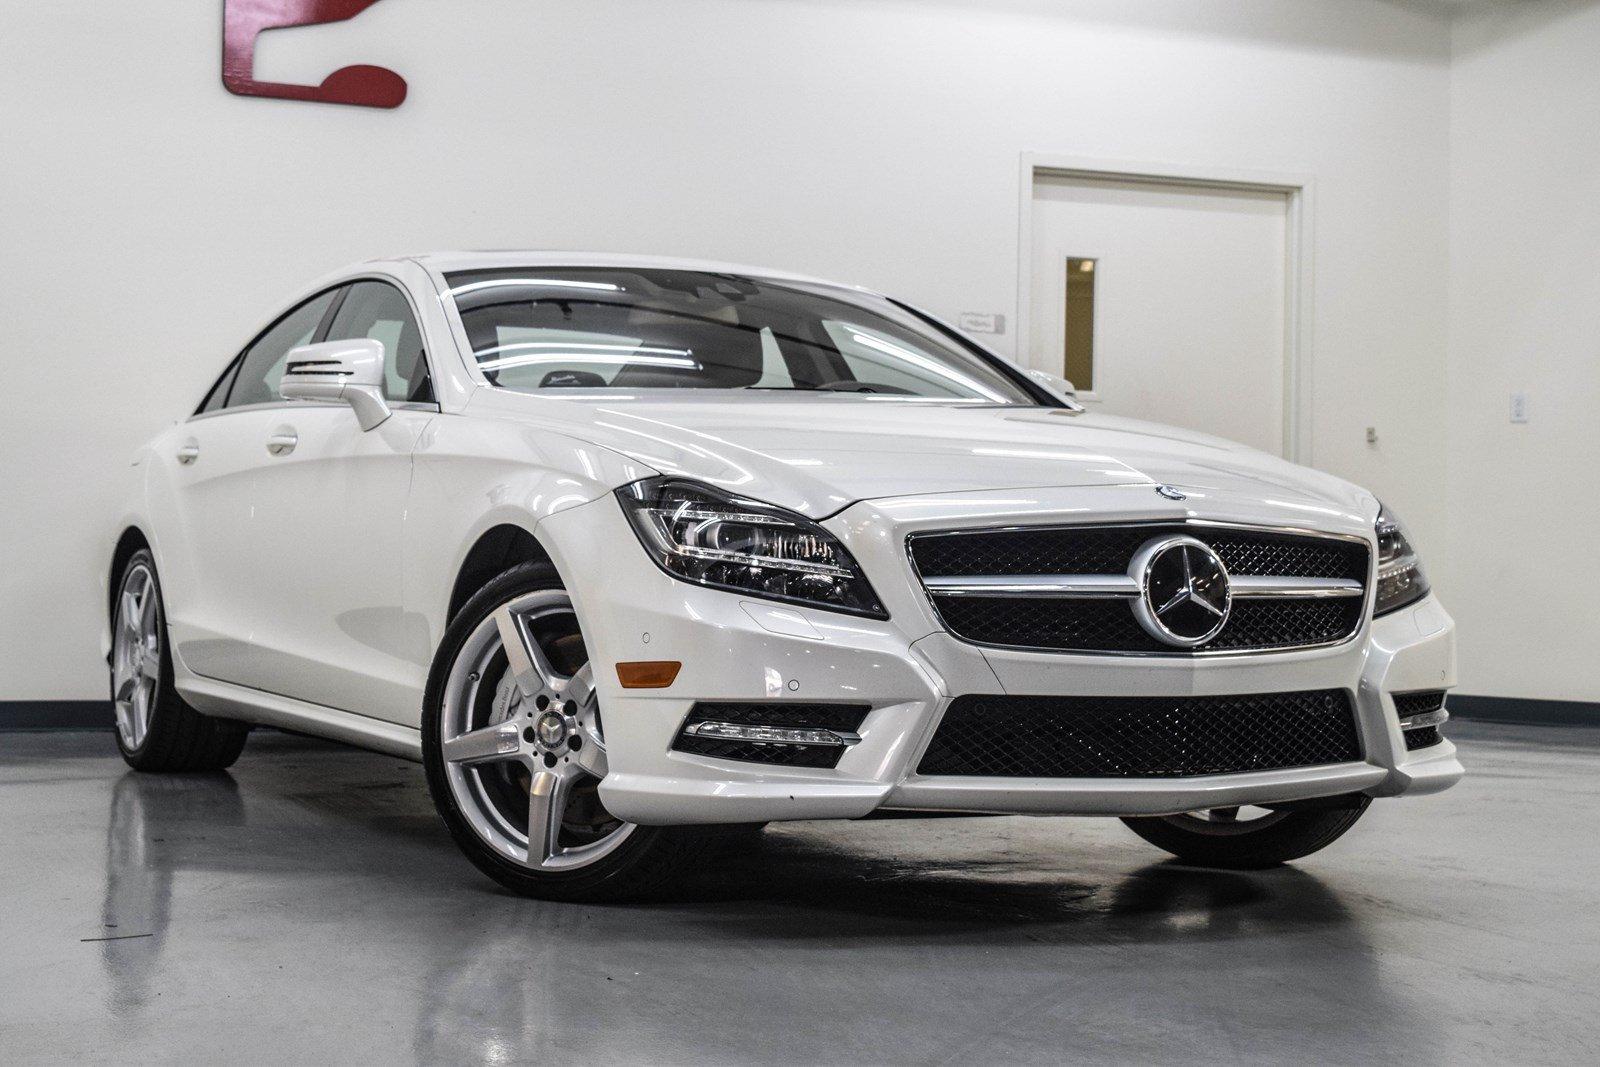 Used 2014 Mercedes-Benz CLS-Class CLS550 for sale Sold at Gravity Autos Marietta in Marietta GA 30060 2